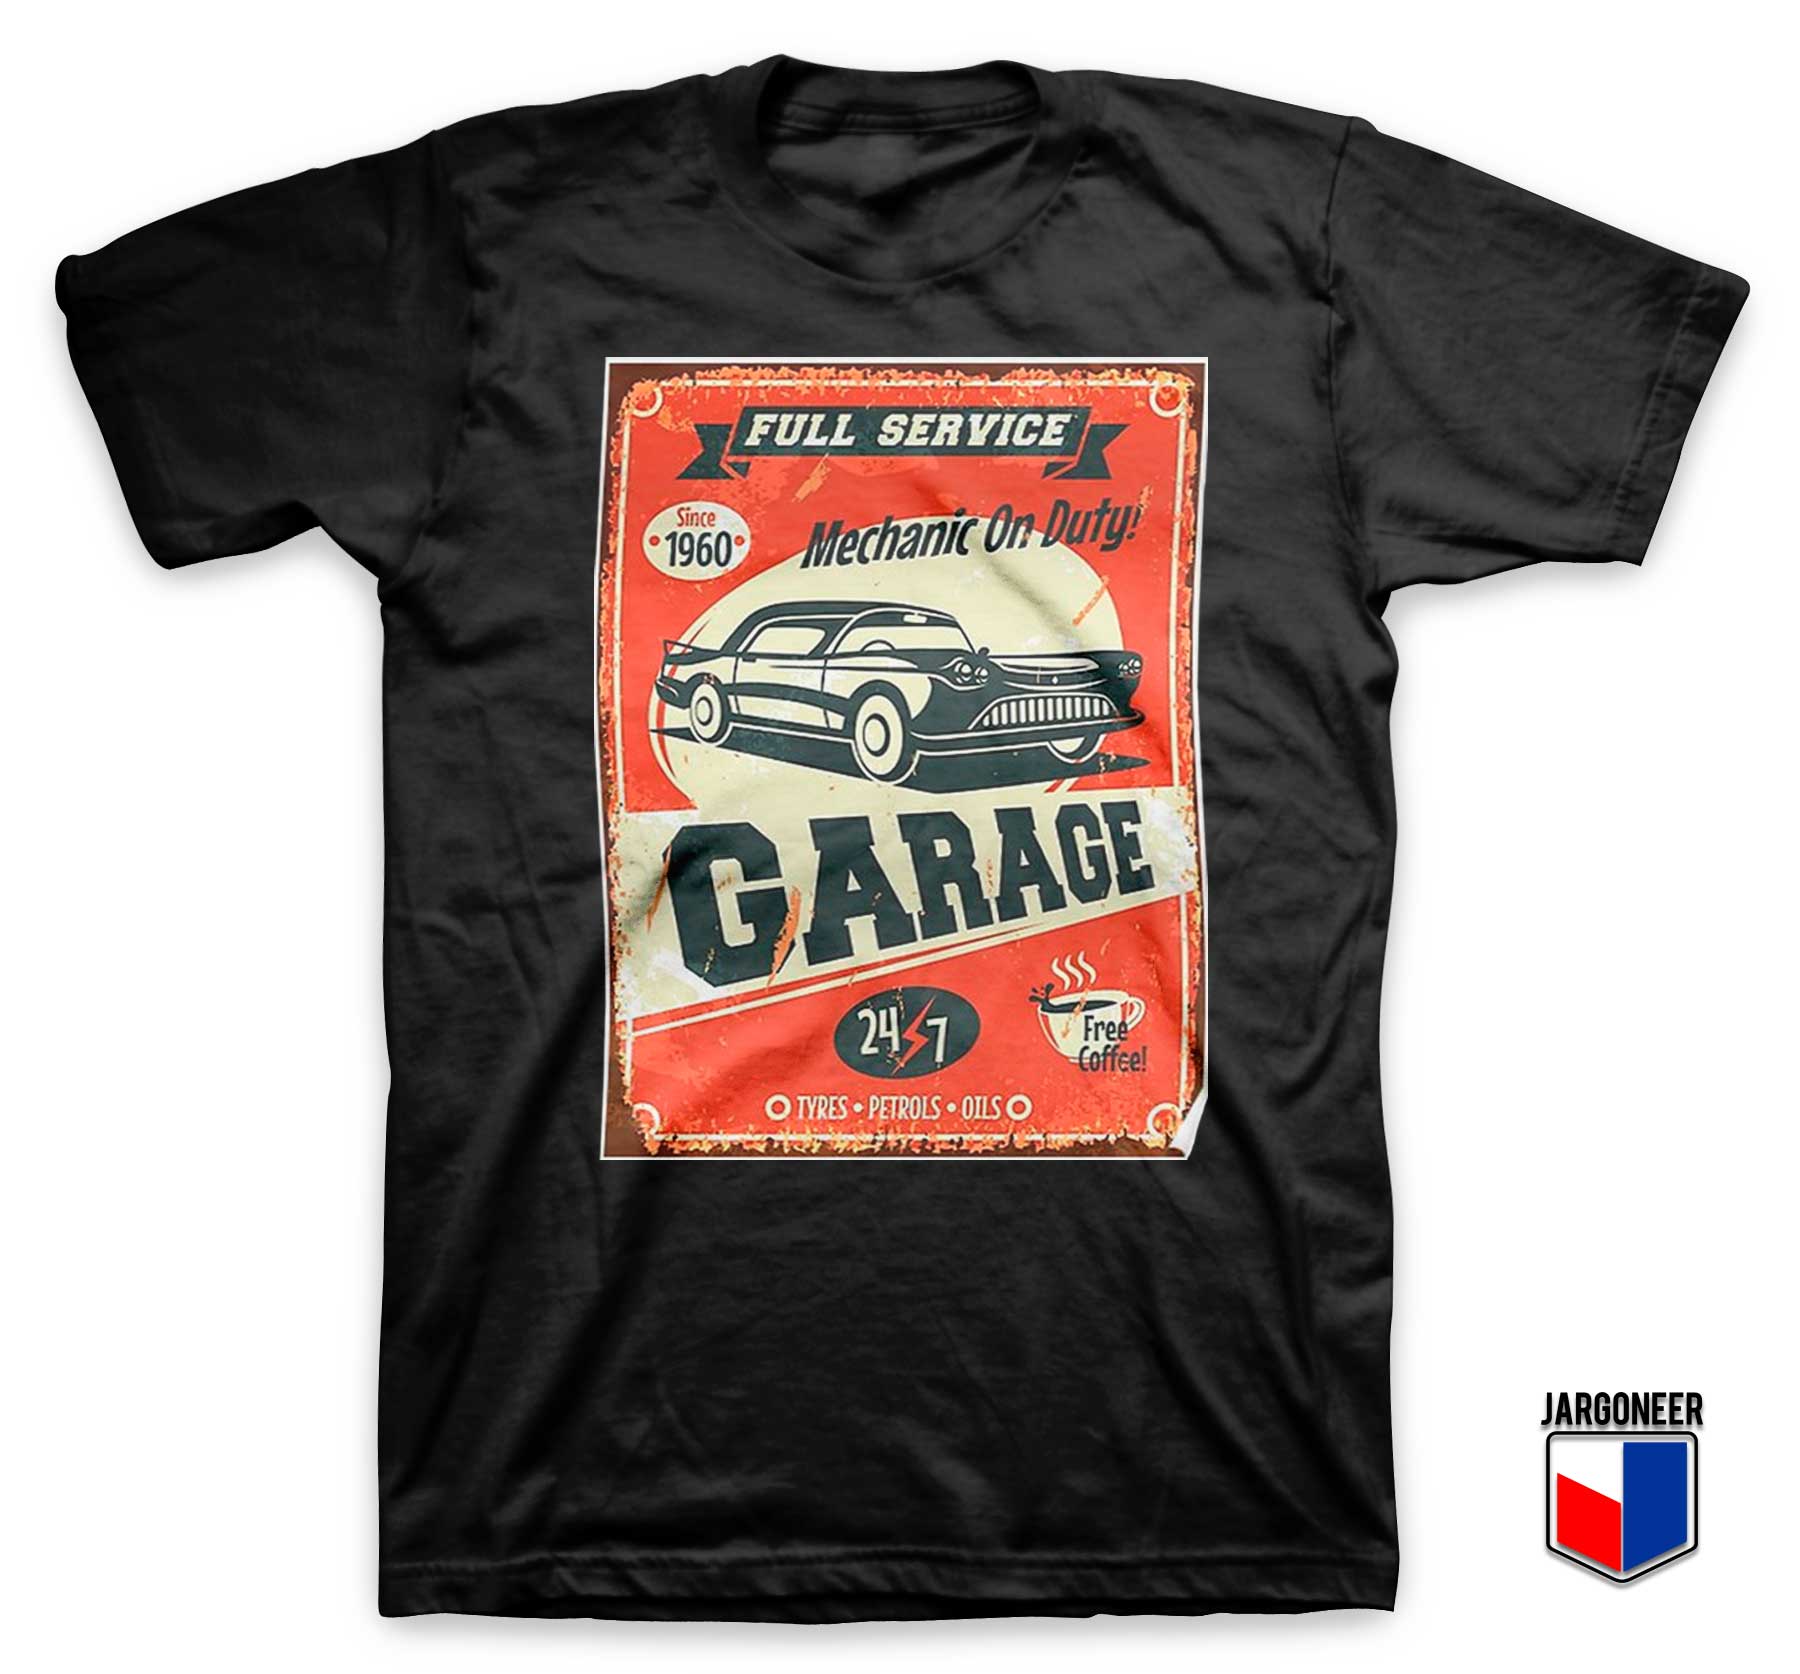 Buy Now Mechanic On Duty Garage T Shirt with Unique Graphic